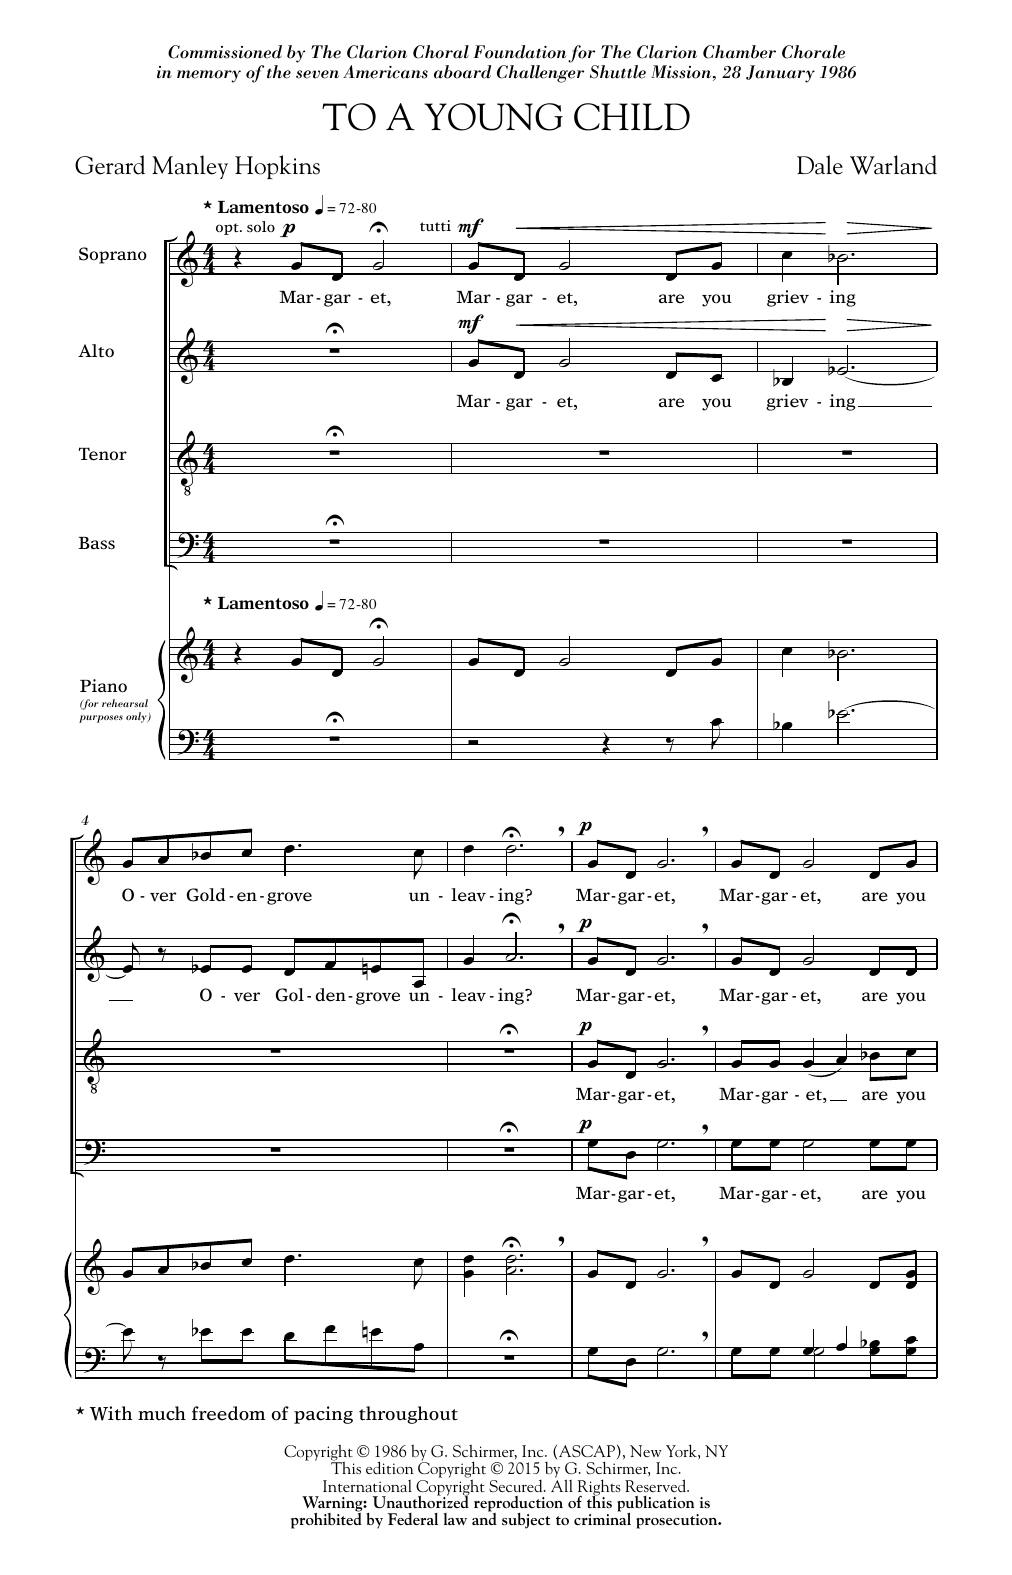 Download Dale Warland To A Young Child Sheet Music